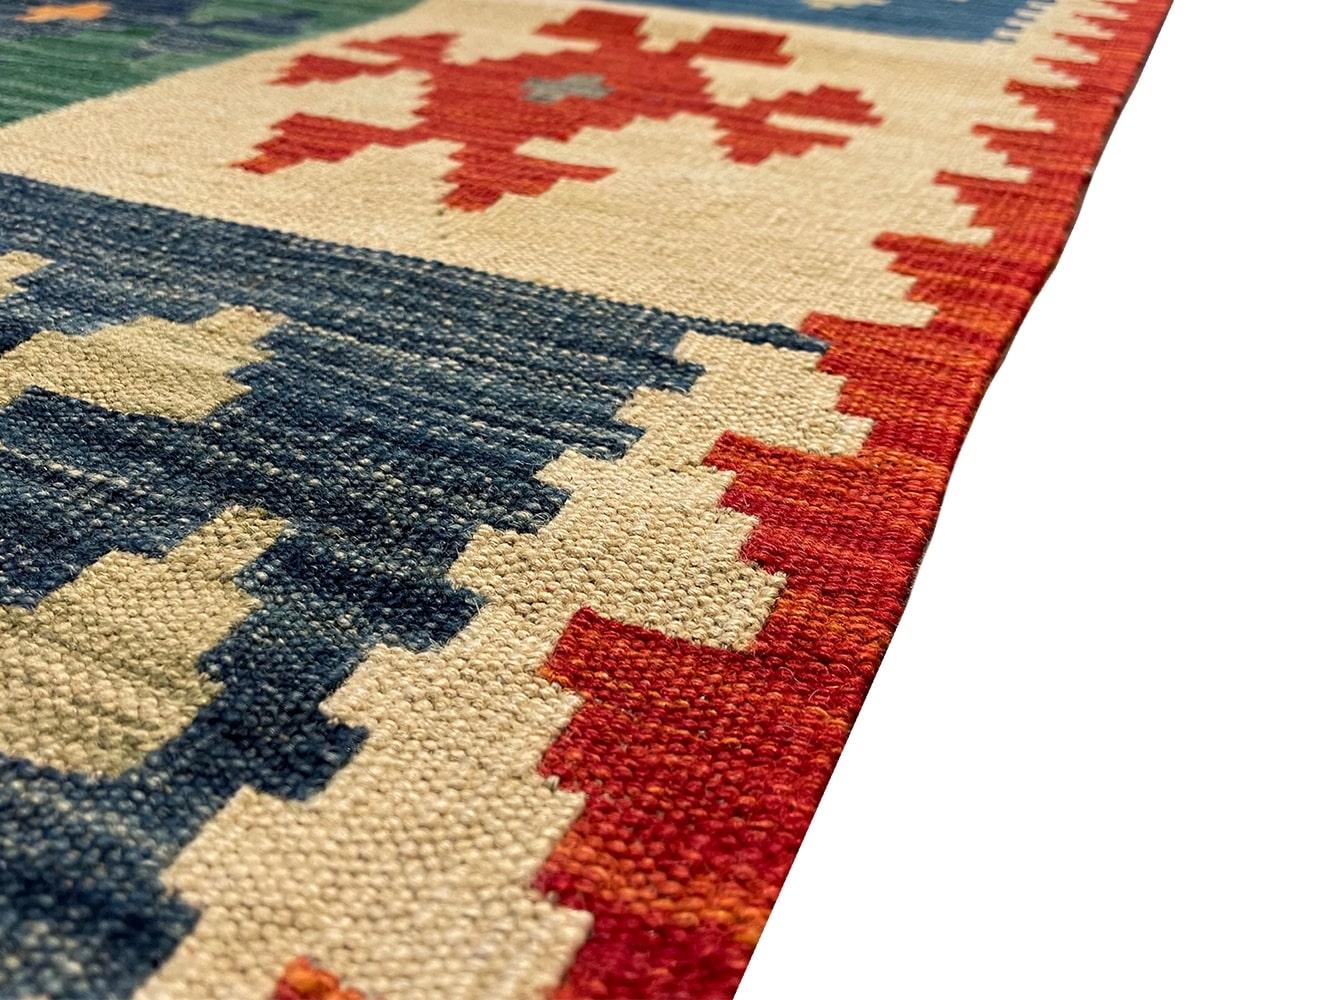 Hand-Woven All Wool Colorful Kilim Runner For Sale